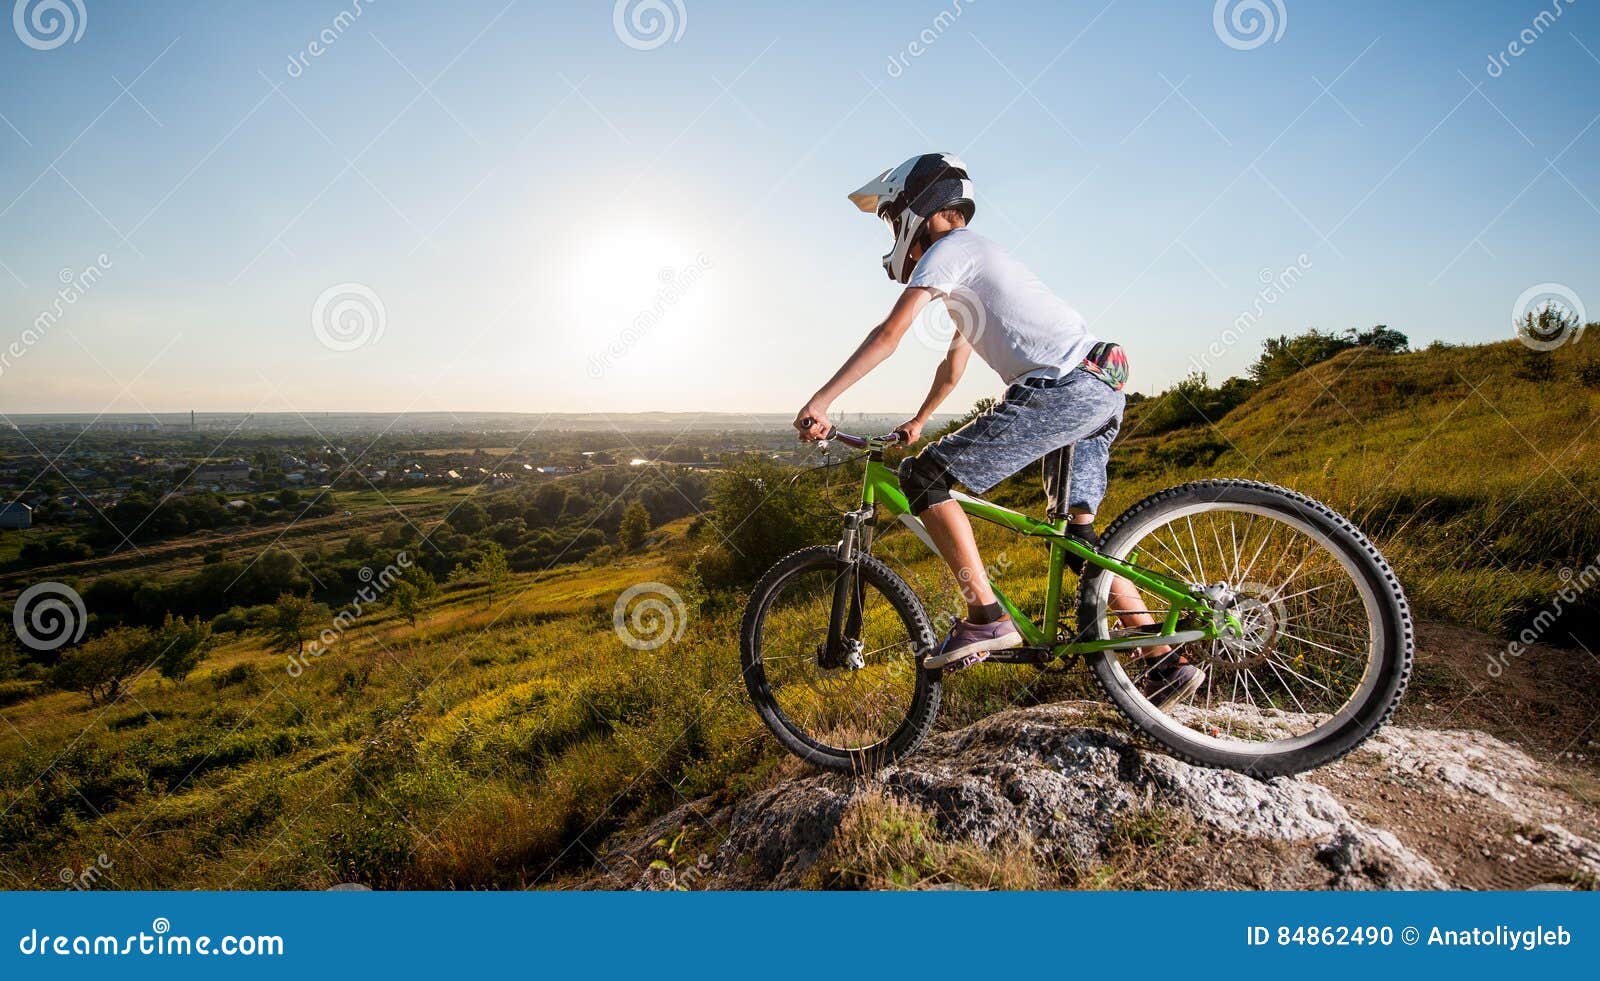 Cyclist With Mountain Bike On The Hill Under Blue Sky Stock Photo Image Of Precipice Cycle 84862490